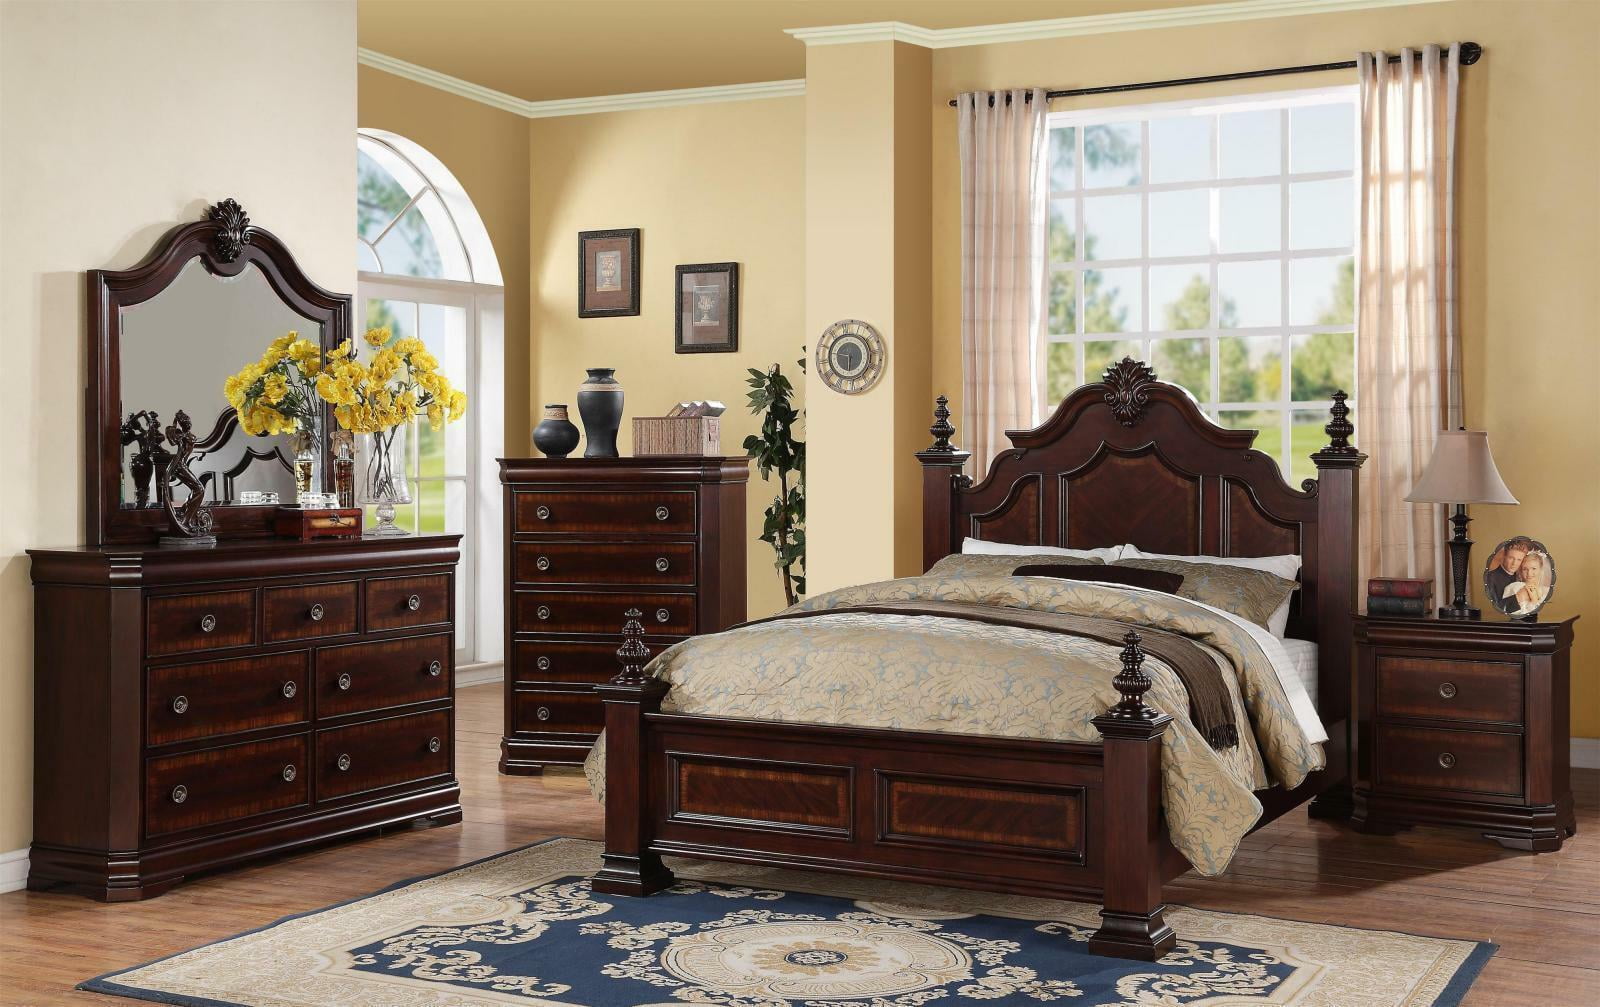 bedroom furniture of good quality